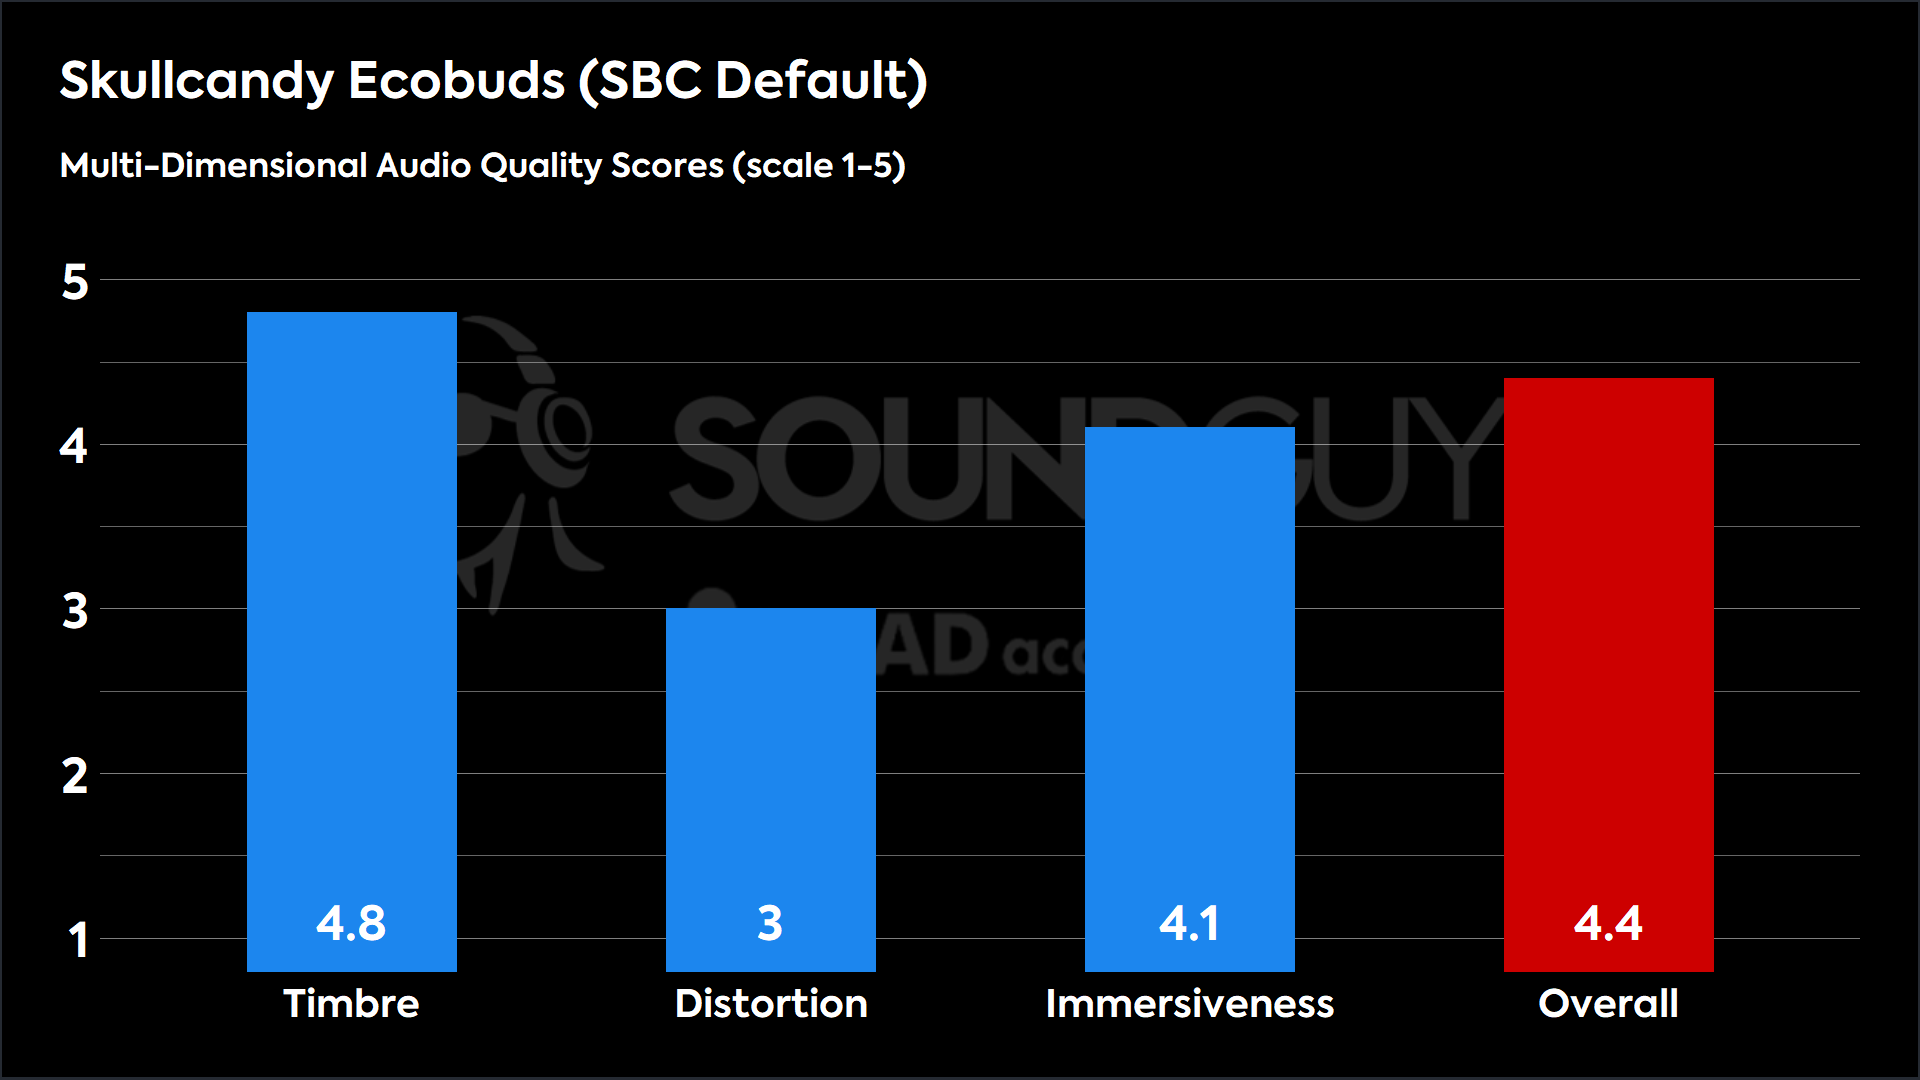 This chart shows the MDAQS results for the Skullcandy Ecobuds in SBC Default mode. The Timbre score is 4.8, The Distortion score is 3, the Immersiveness score is 4.1, and the Overall Score is 4.4).